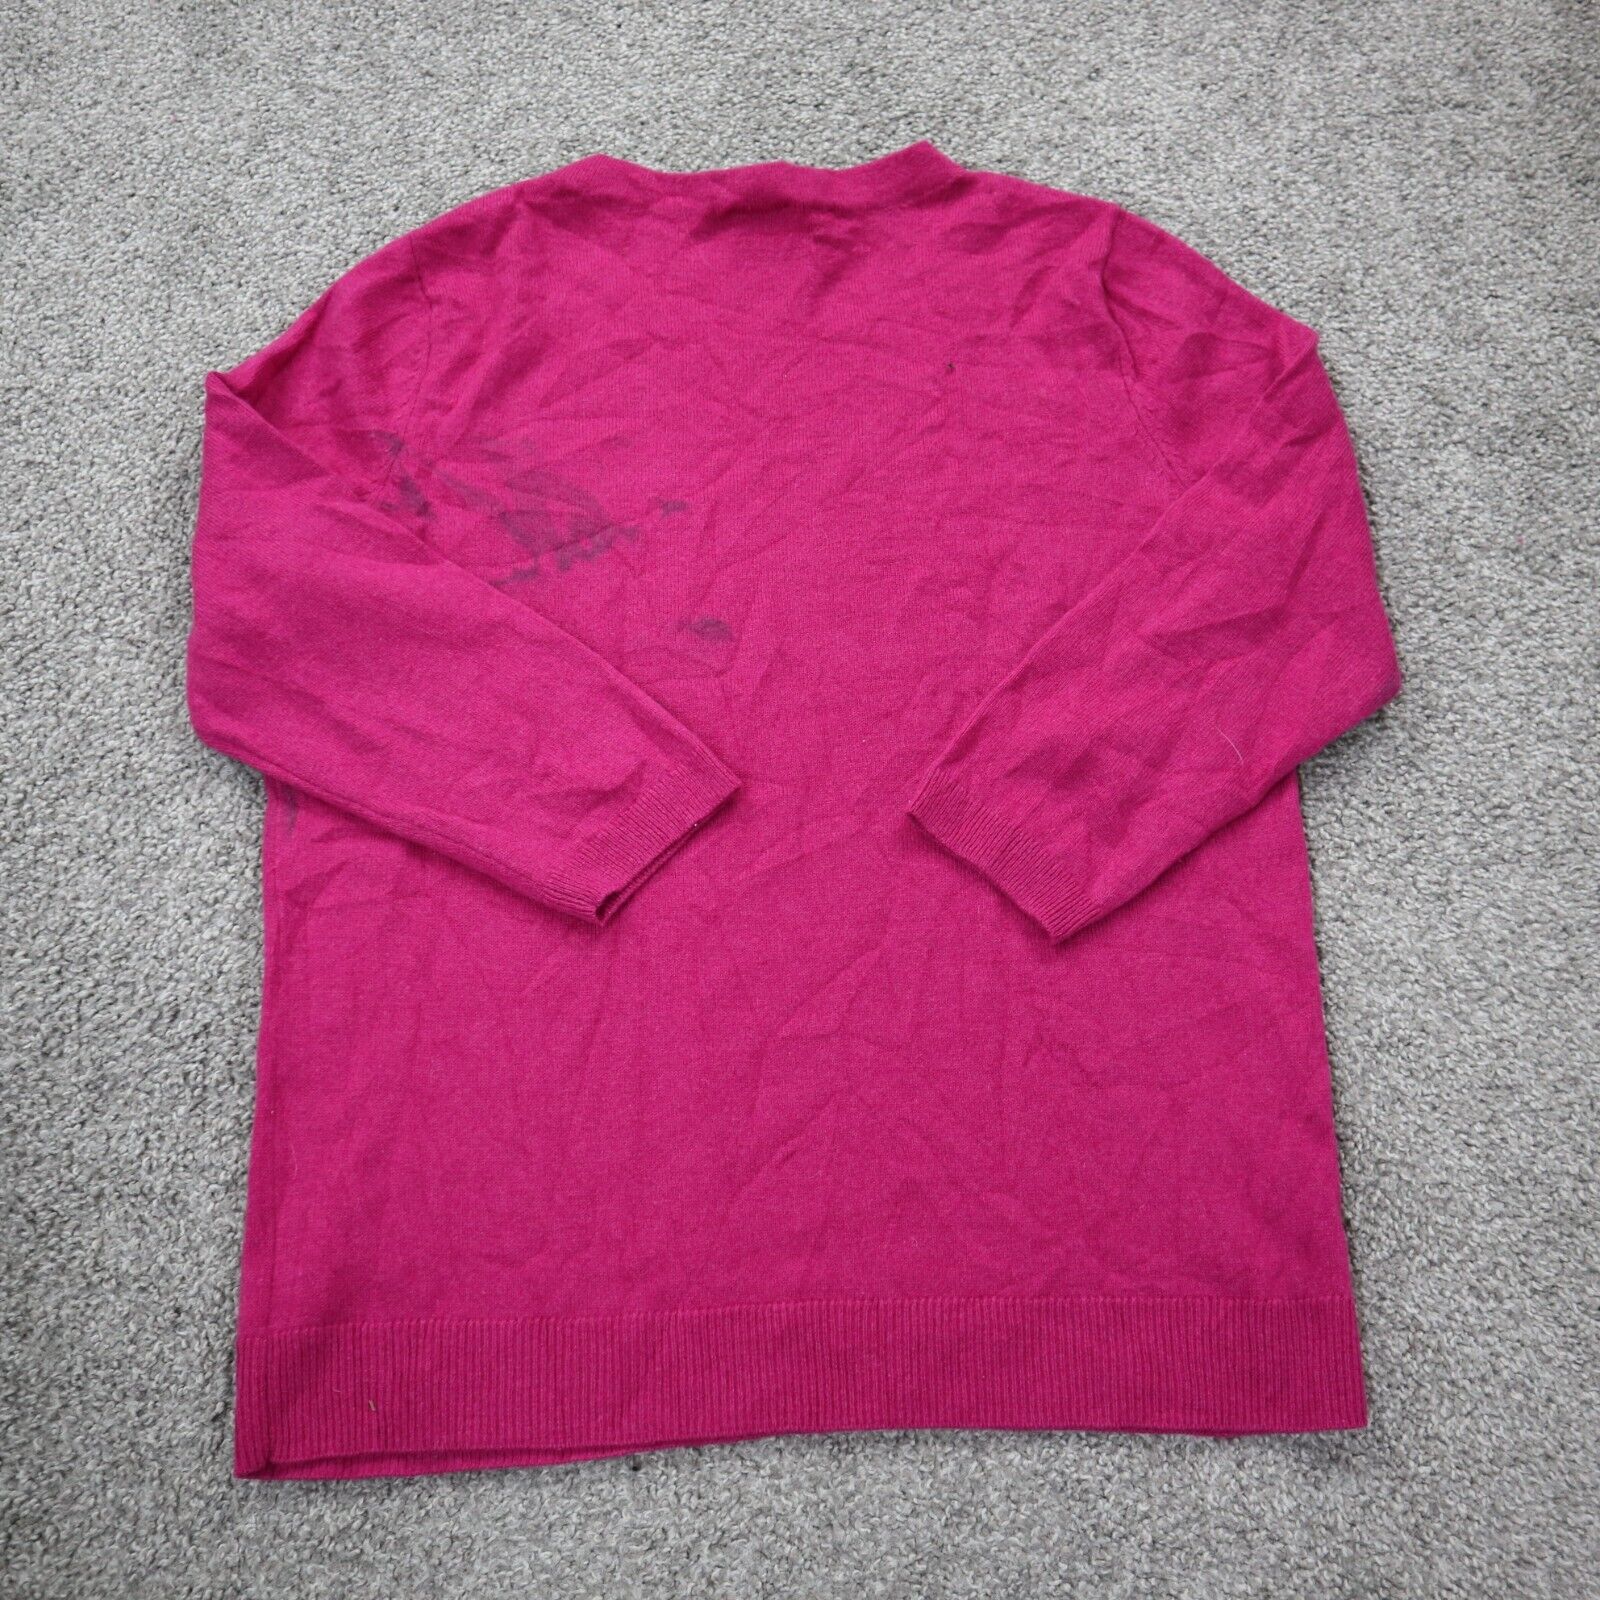 Womens Tops TALBOTS PINK 3/4 Sleeve Collar COTTON TOP